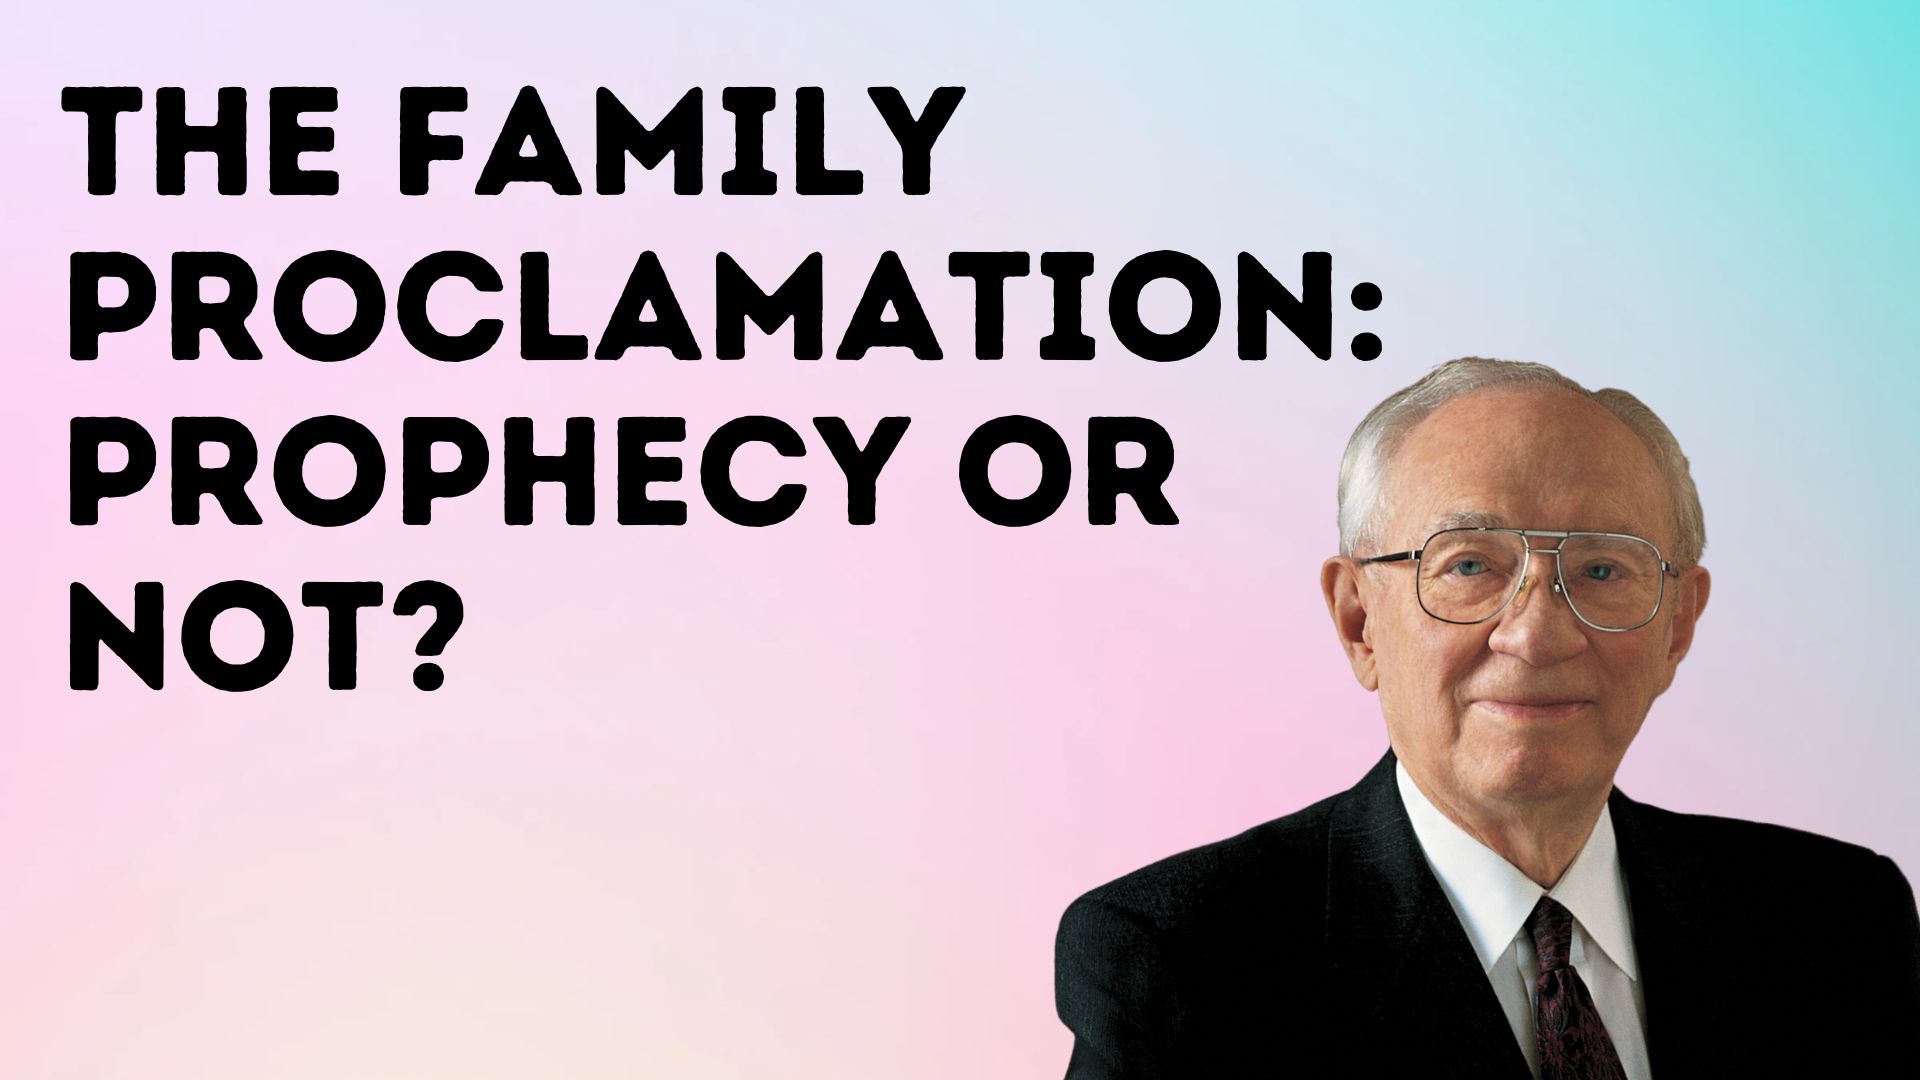 The Family Proclamation: Prophecy or Not?